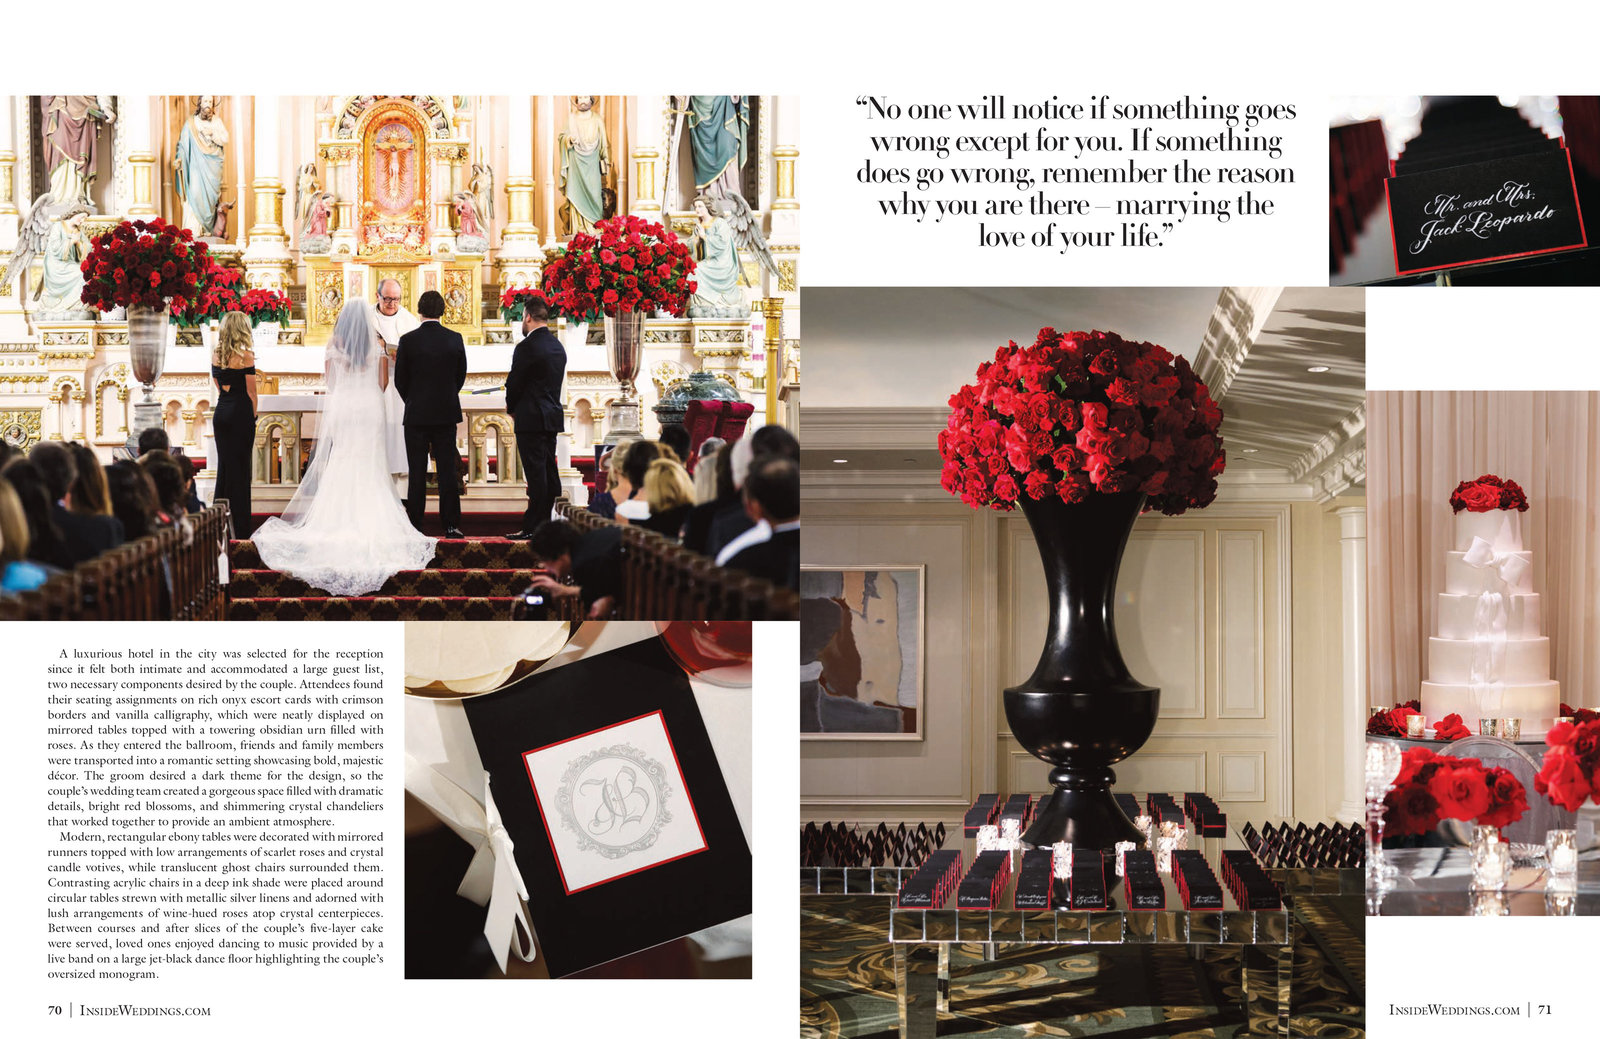 We are beyond excited to share Brooke and Jack's wedding in one of the most luxurious bridal magazines there is... Inside Weddings - Winter Edition 2019. We can't thank the team at IW, Walt, Art and Nicole for selecting this beautiful wedding.  Event Planner, Marcy Glink of Great Events and Event Designer, Vince Hart of Kehoe Designs did a meticulously job of bringing their wedding to fruition! Click here for a list of vendors.